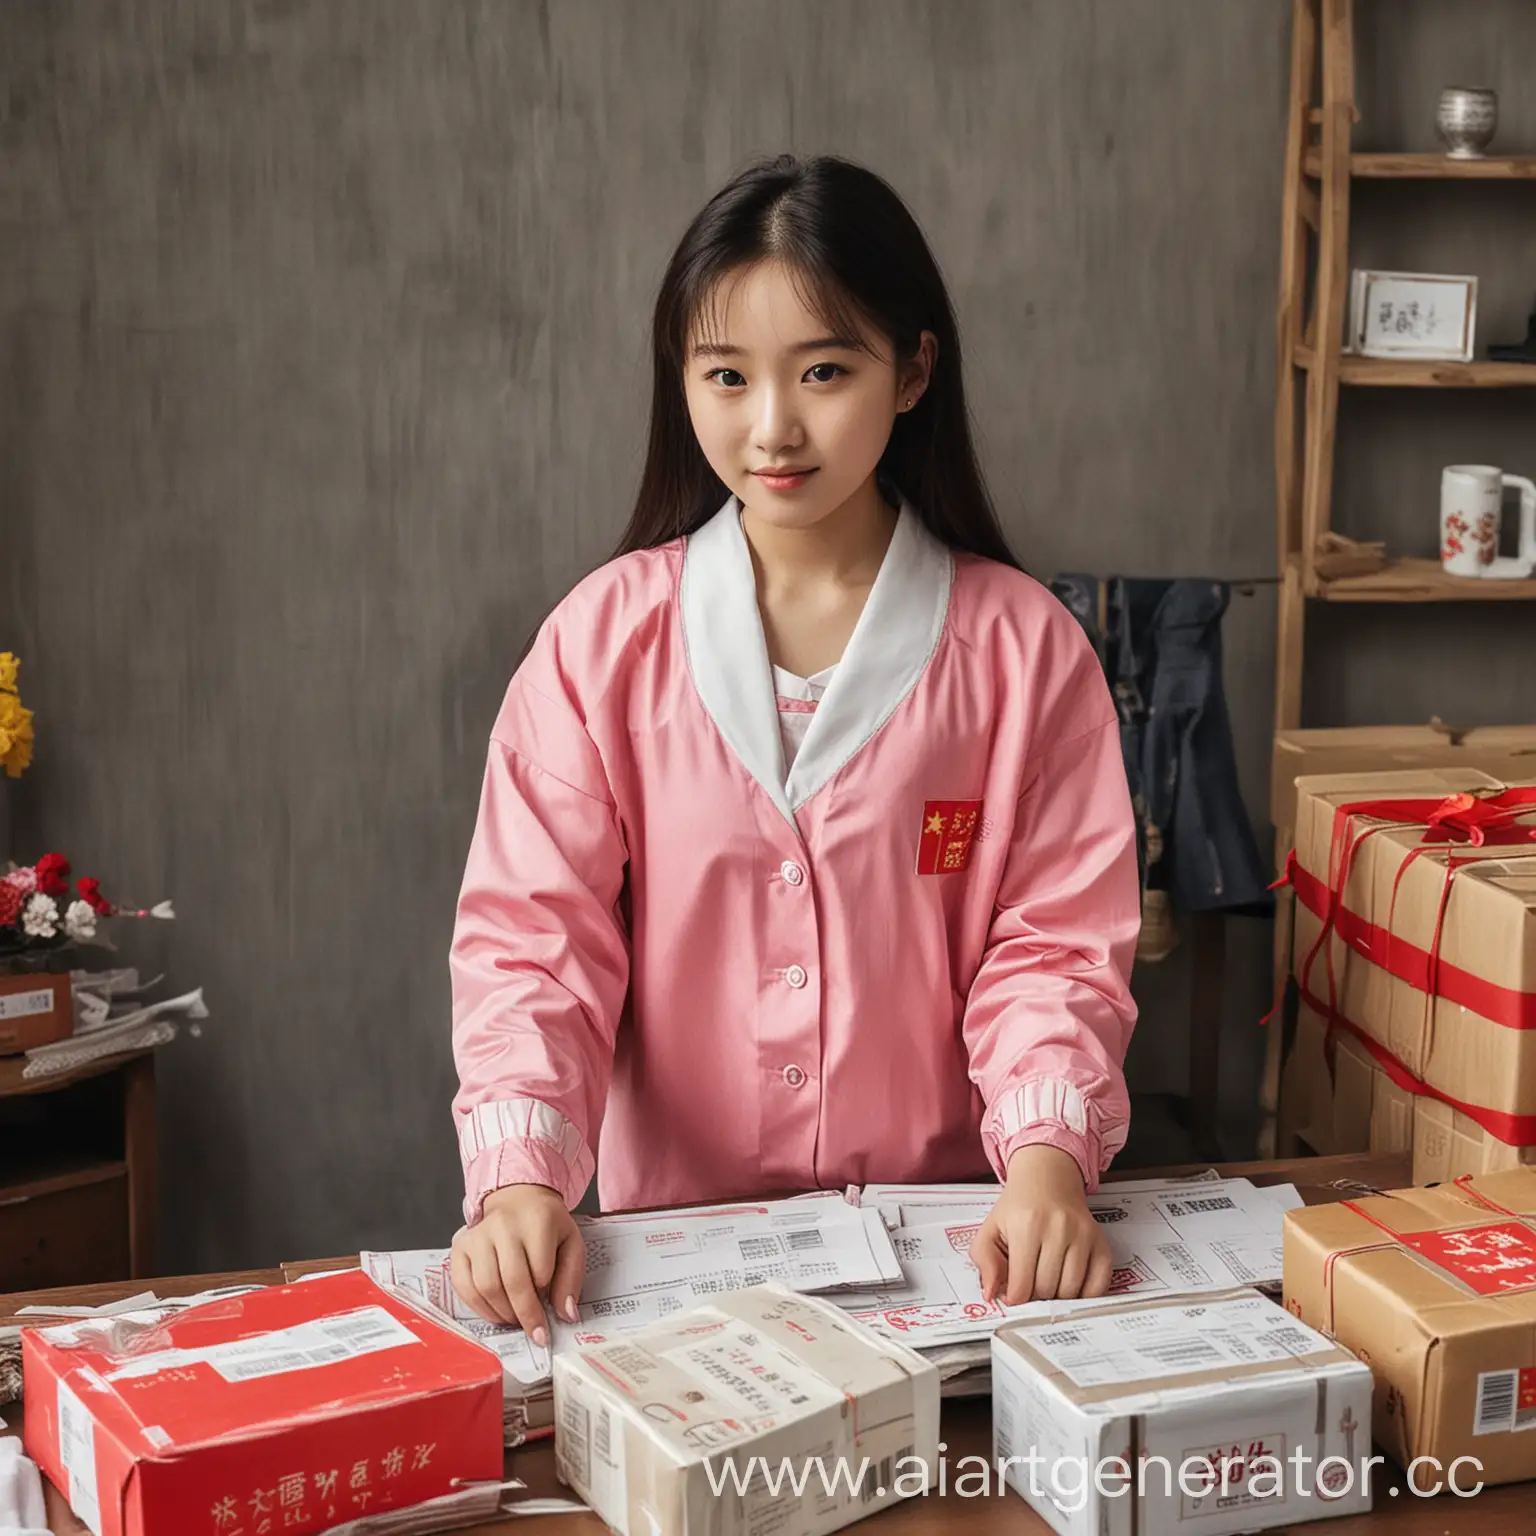 Young-Girl-Orders-from-China-International-Commerce-and-Youthful-Curiosity